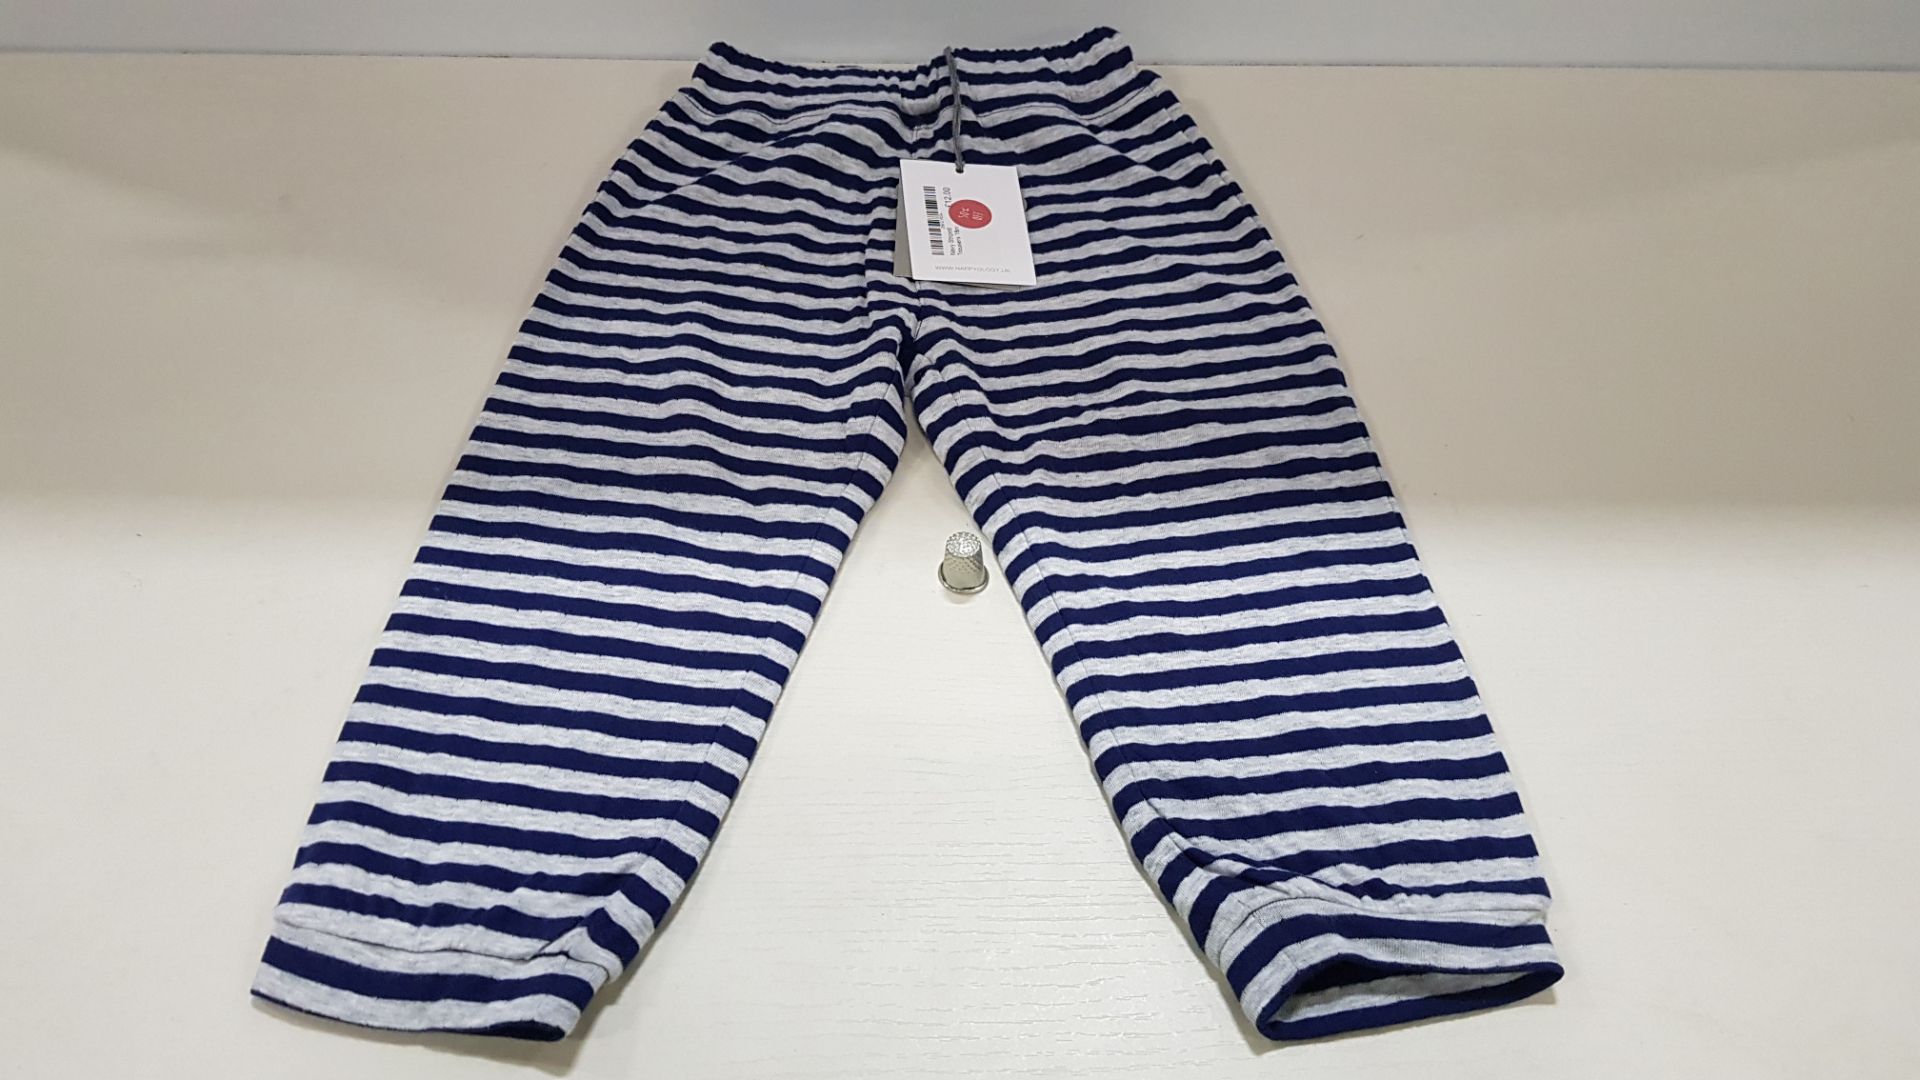 9 X BRAND NEW HAPPYOLOGY KIDS SETS NAVY STRIPED TEES AND PANTS IE AGE 18-24 AND 12-18 MONTHS RRP £